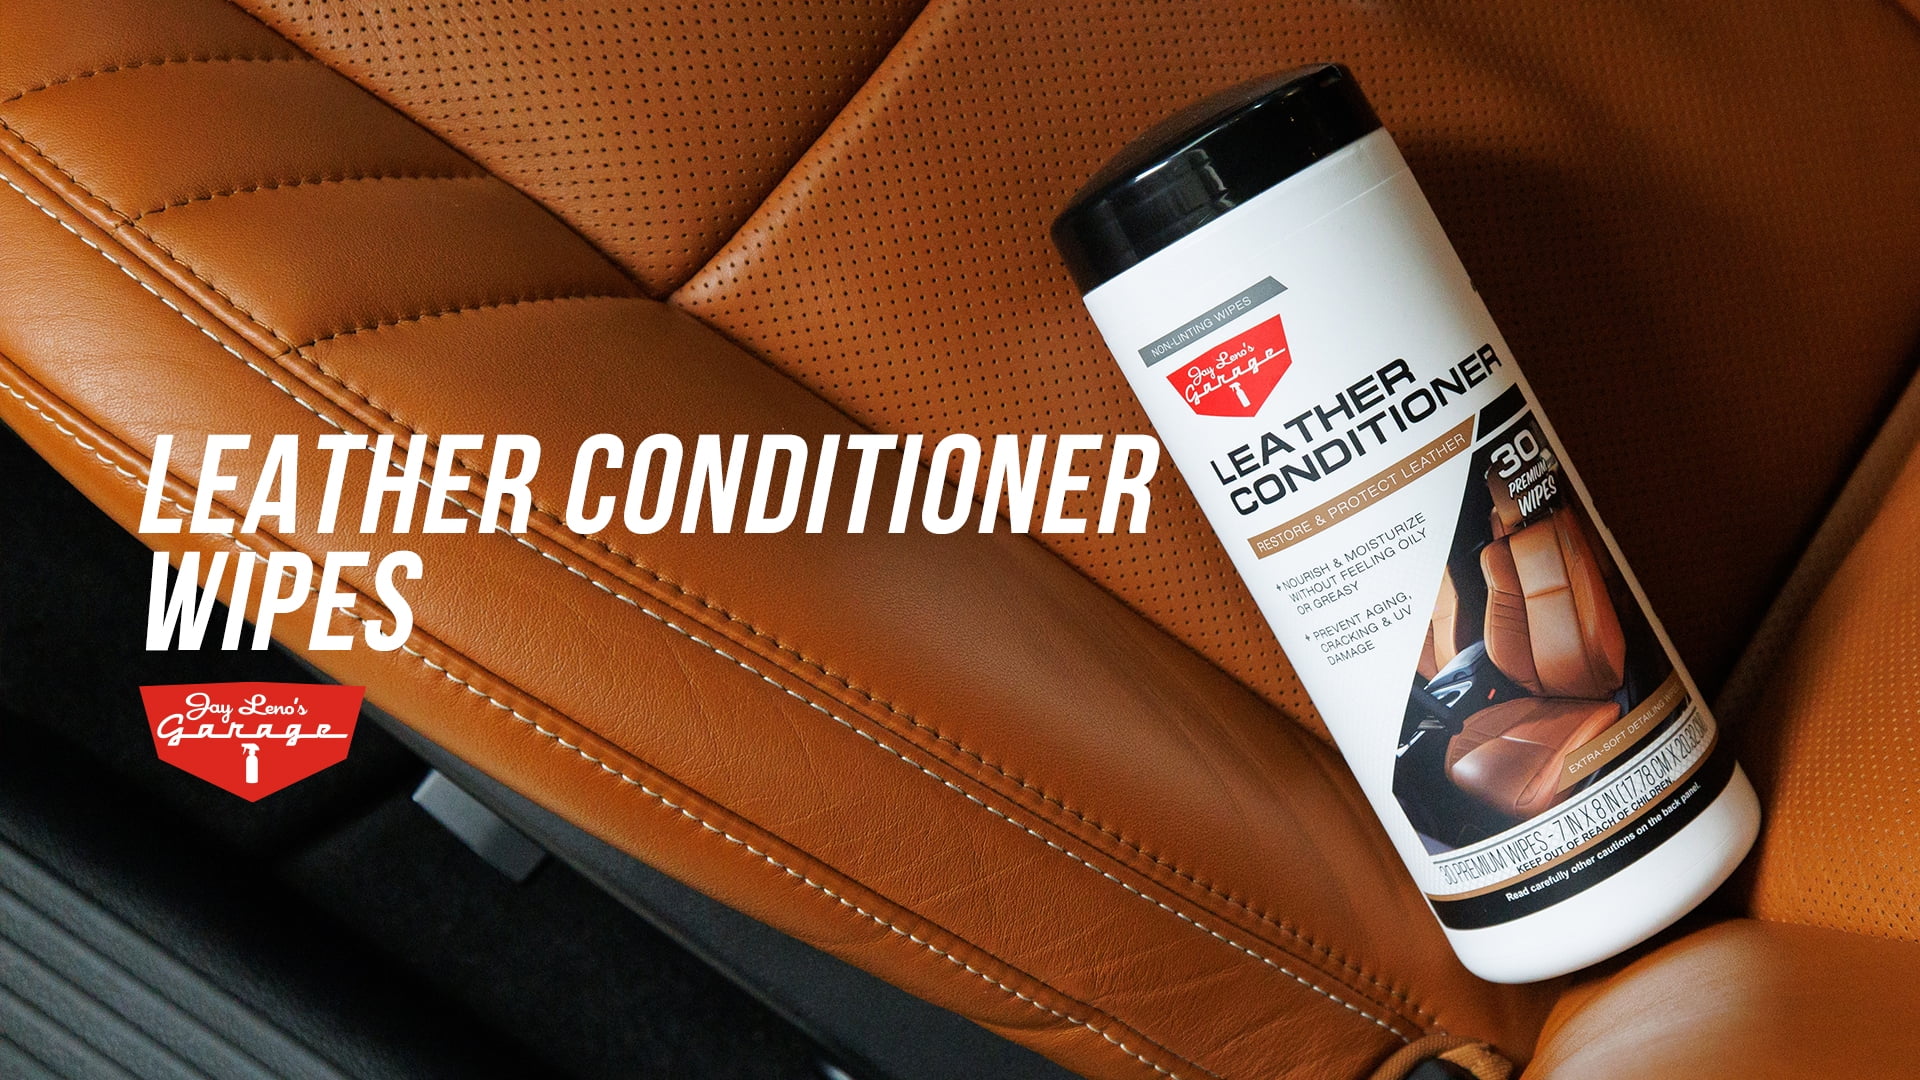 Jay Leno's Garage Leather Conditioner Wipes (30 Count) - Protect